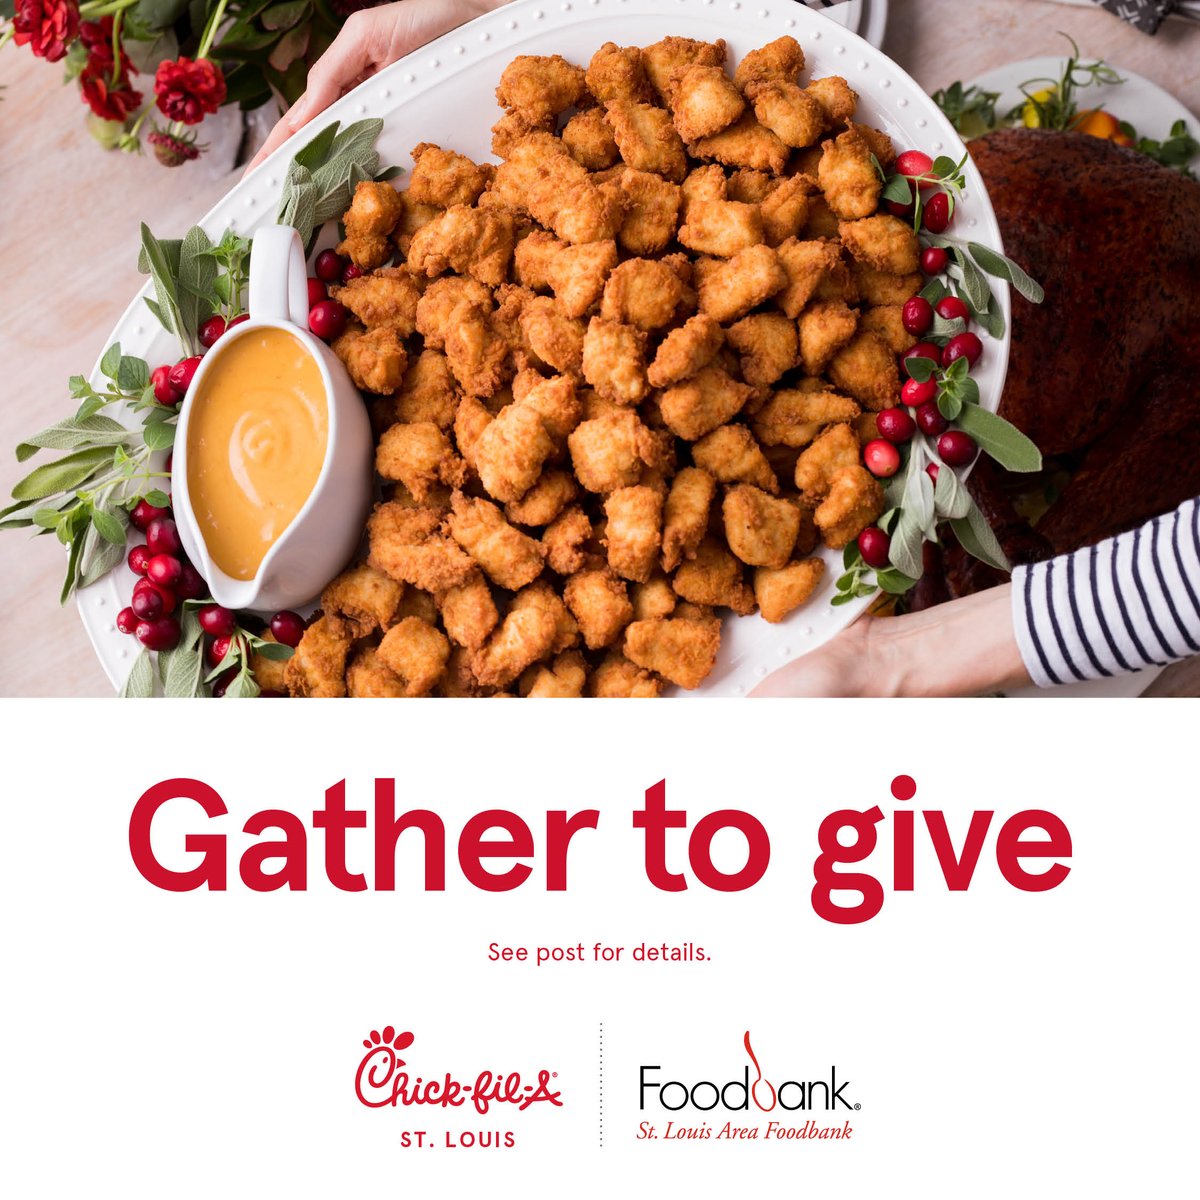 From November 13th-25th, our friends at Chick-Fil-A are donating a percentage of each nugget tray they sell to support the St. Louis Area Foodbank! Enjoy some delicious Chick-Fil-A with friends this holiday season and help provide nutritious food for our neighbors in need.